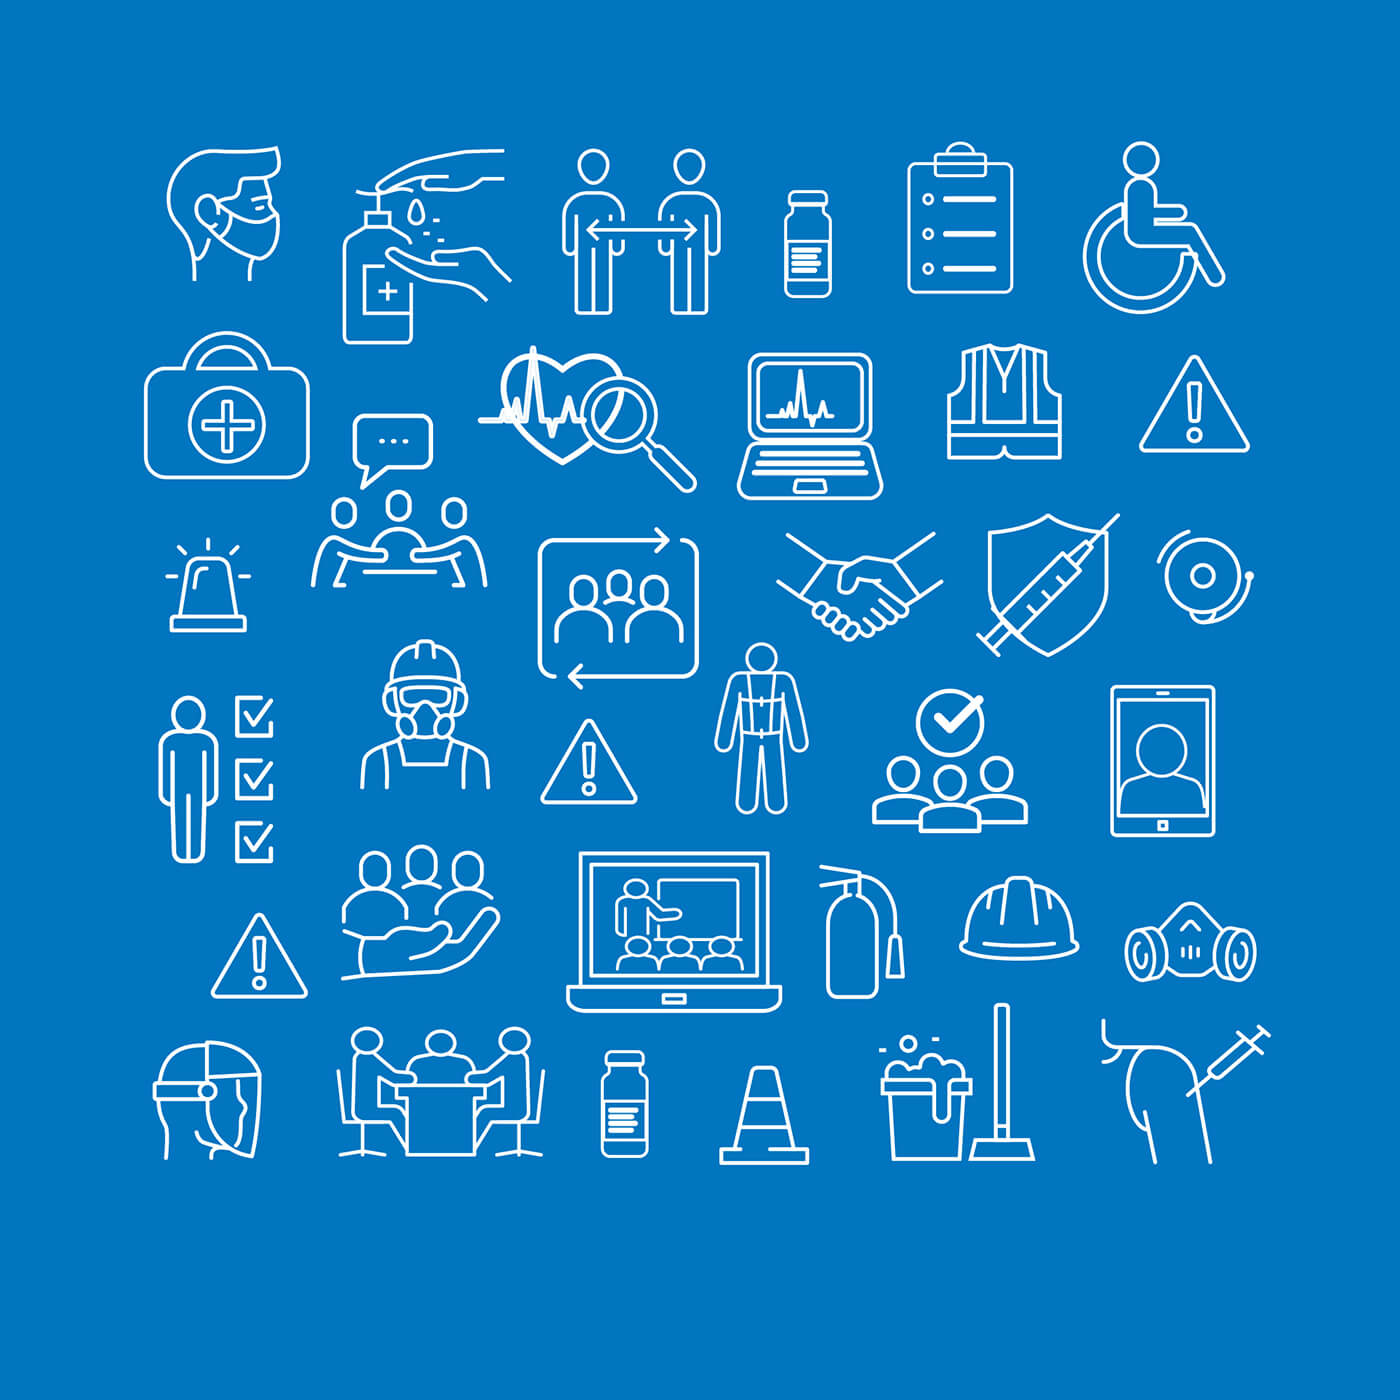 Workplace safety icons on blue background